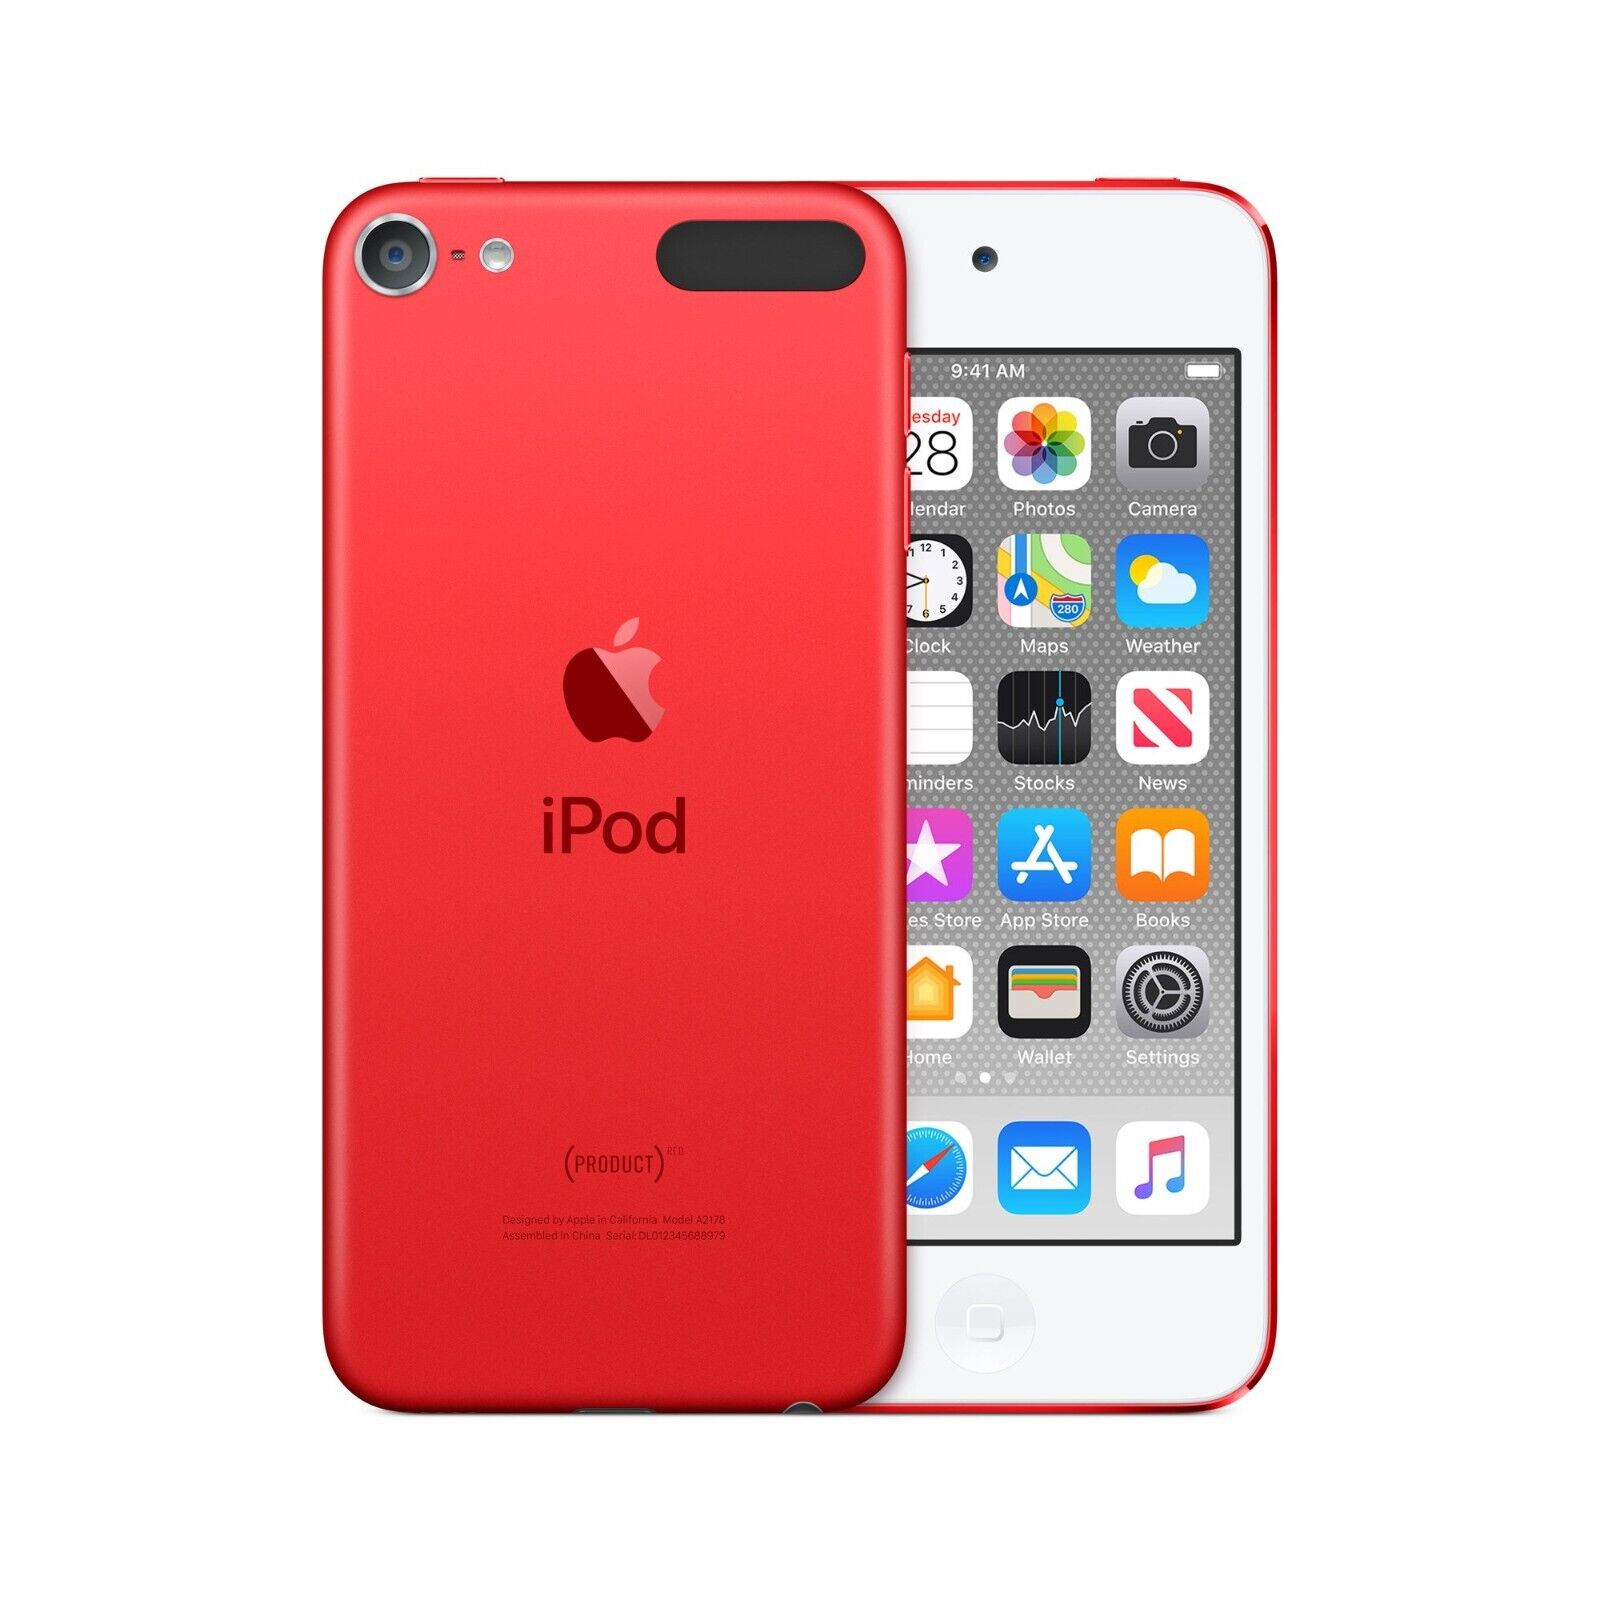 Apple iPod Touch (7th Generation) - (Product) Red, 32GB for sale online |  eBay